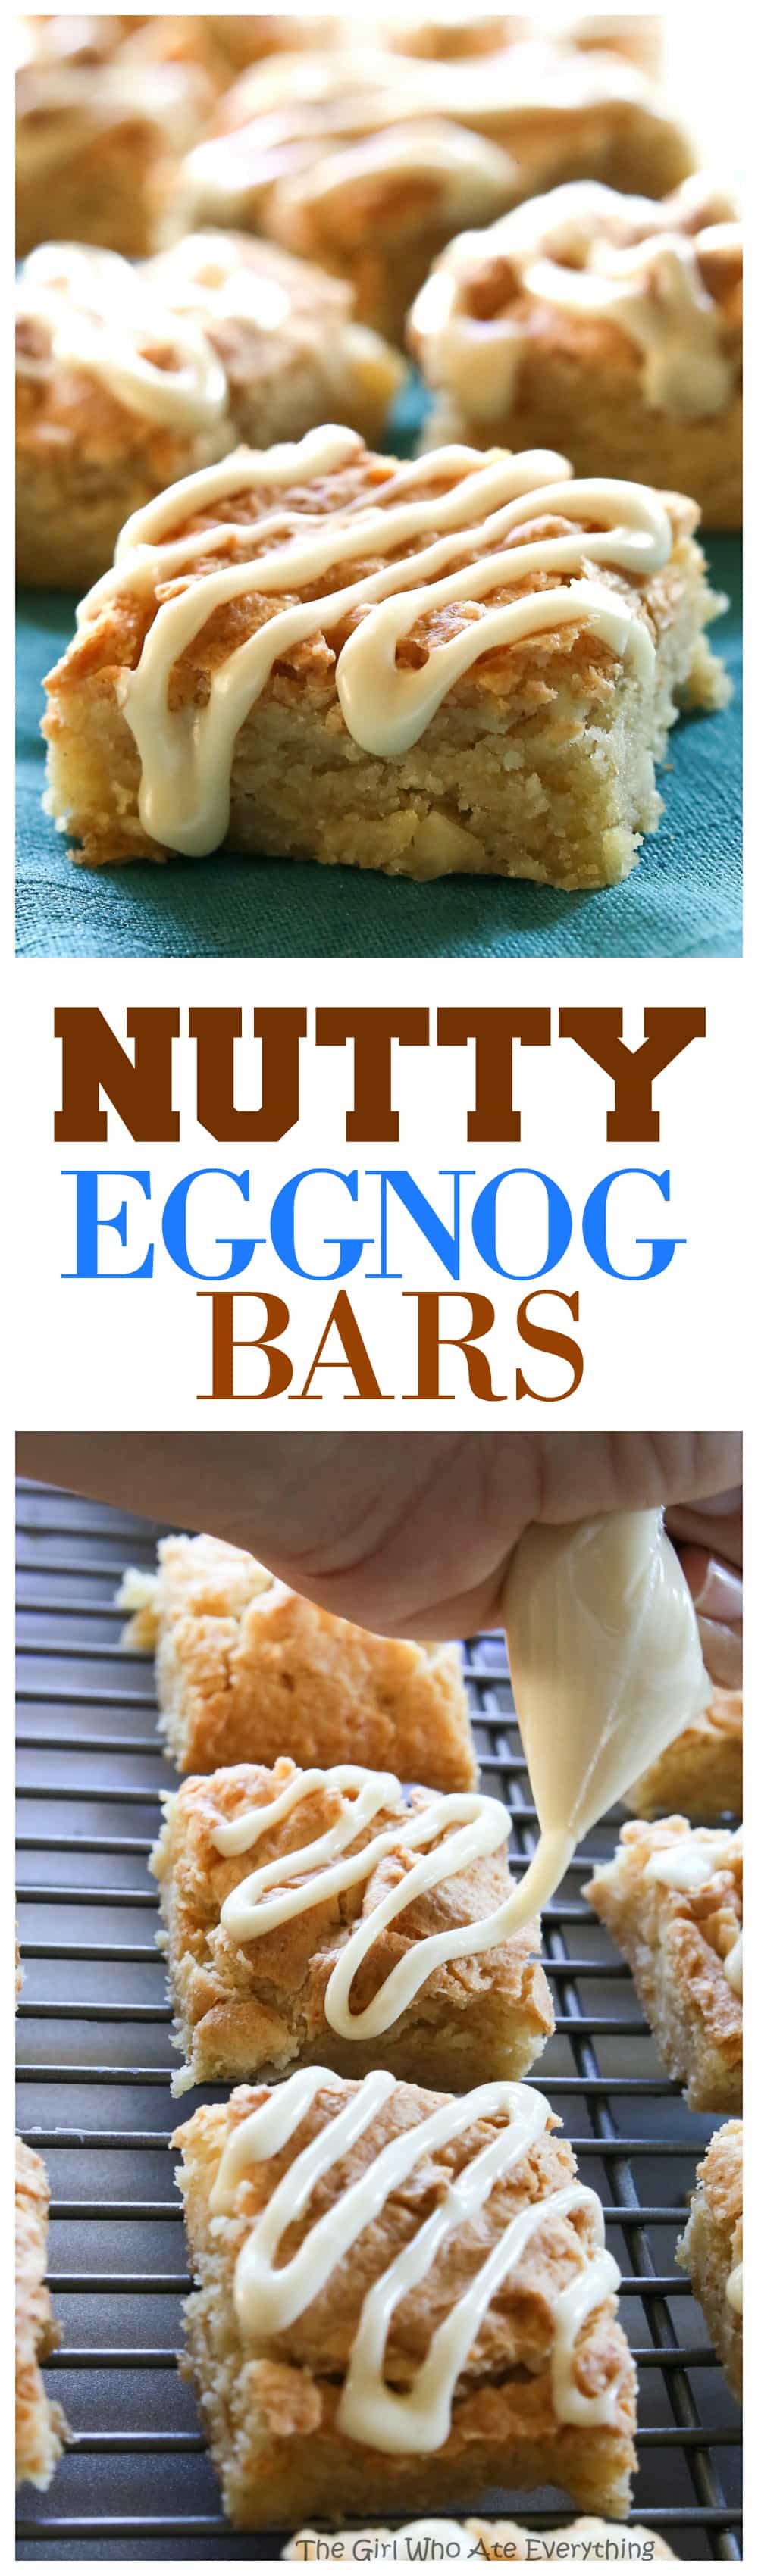 Nutty Eggnog Bars - Super chewy bars with macadamia nuts that are drizzled with an eggnog glaze. the-girl-who-ate-everything.com